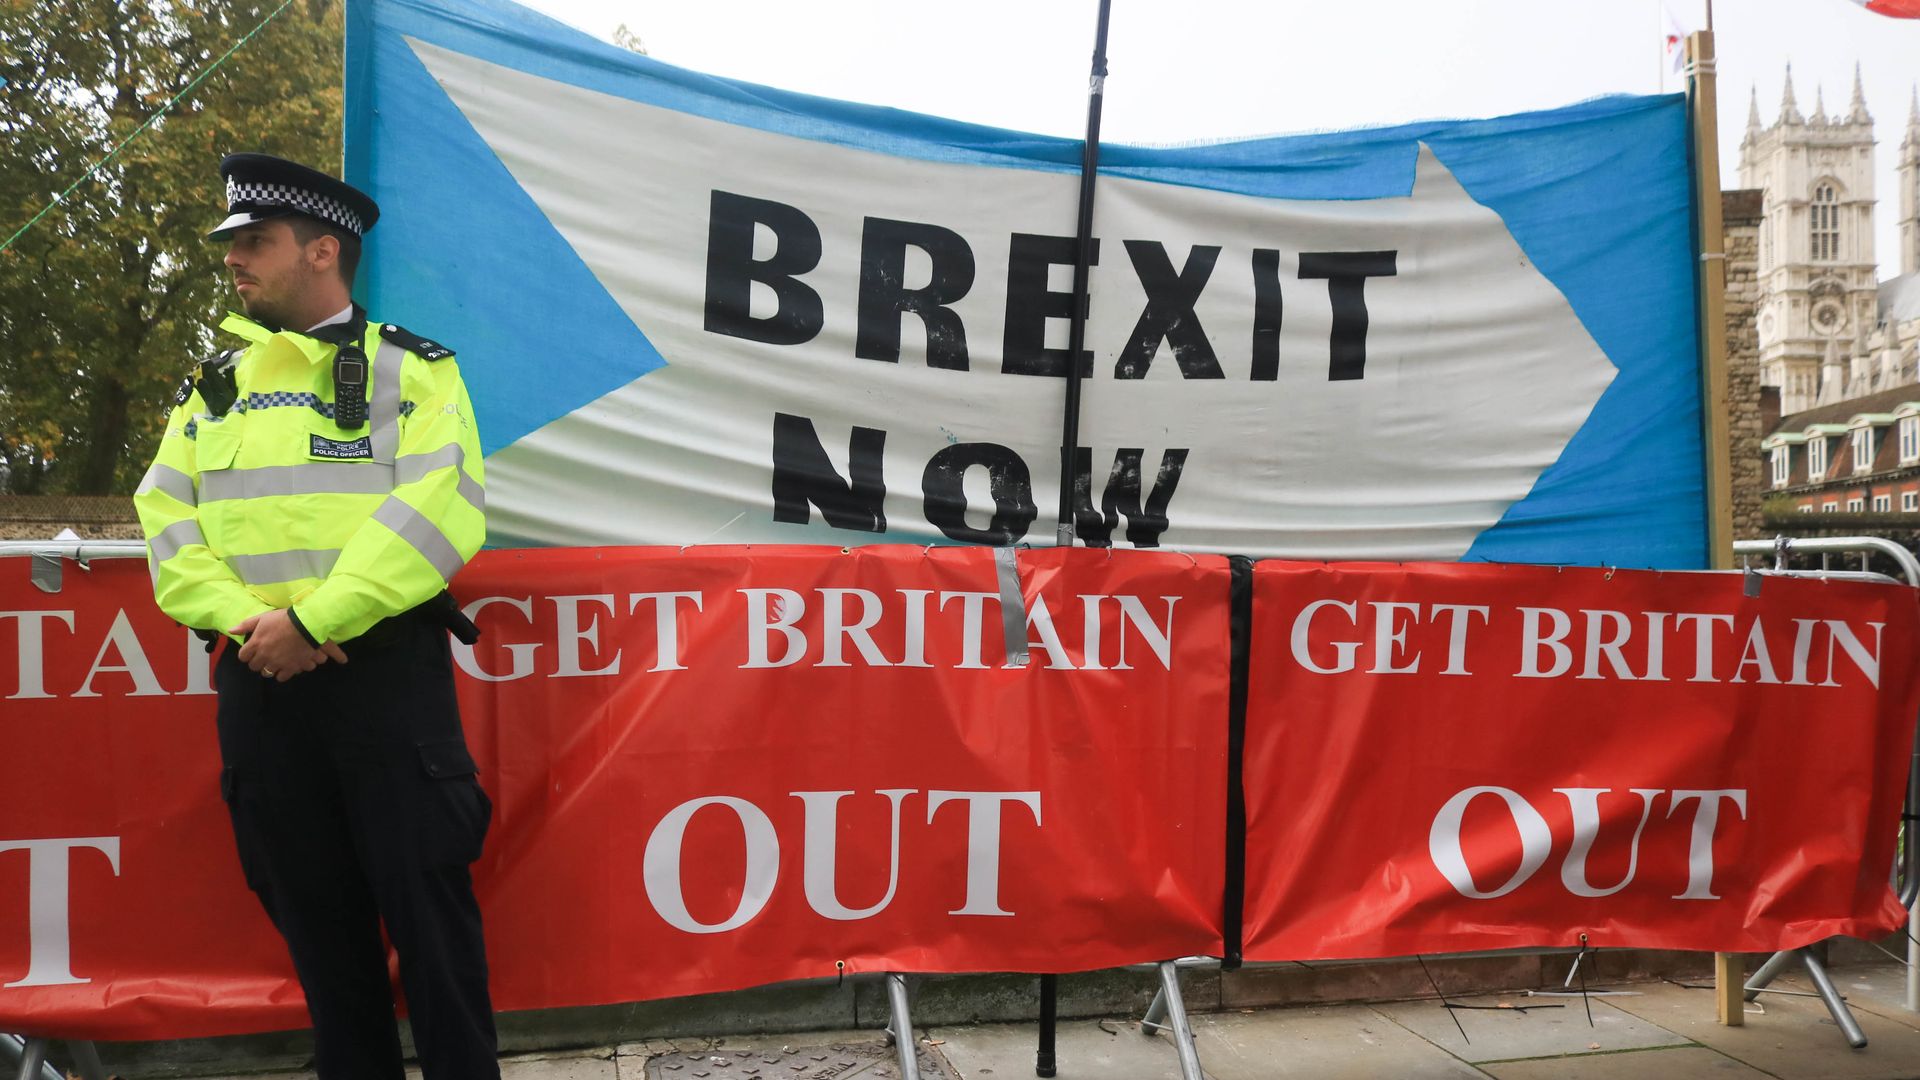 Protest banners by the Brexit Party.